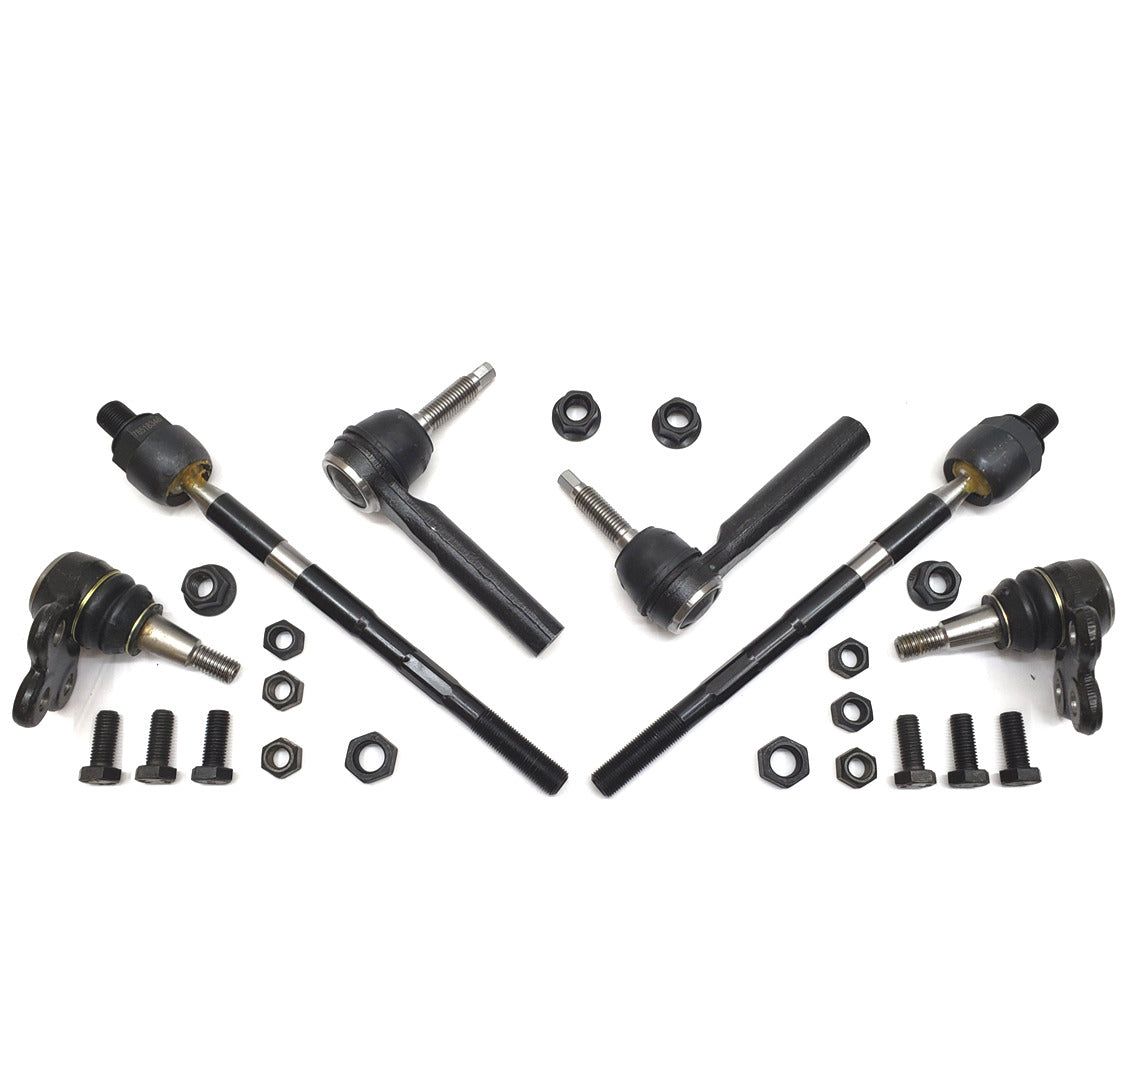 HD Ball Joint Tie Rod Steering Kit for 2007-2016 GMC Acadia 2WD, AWD